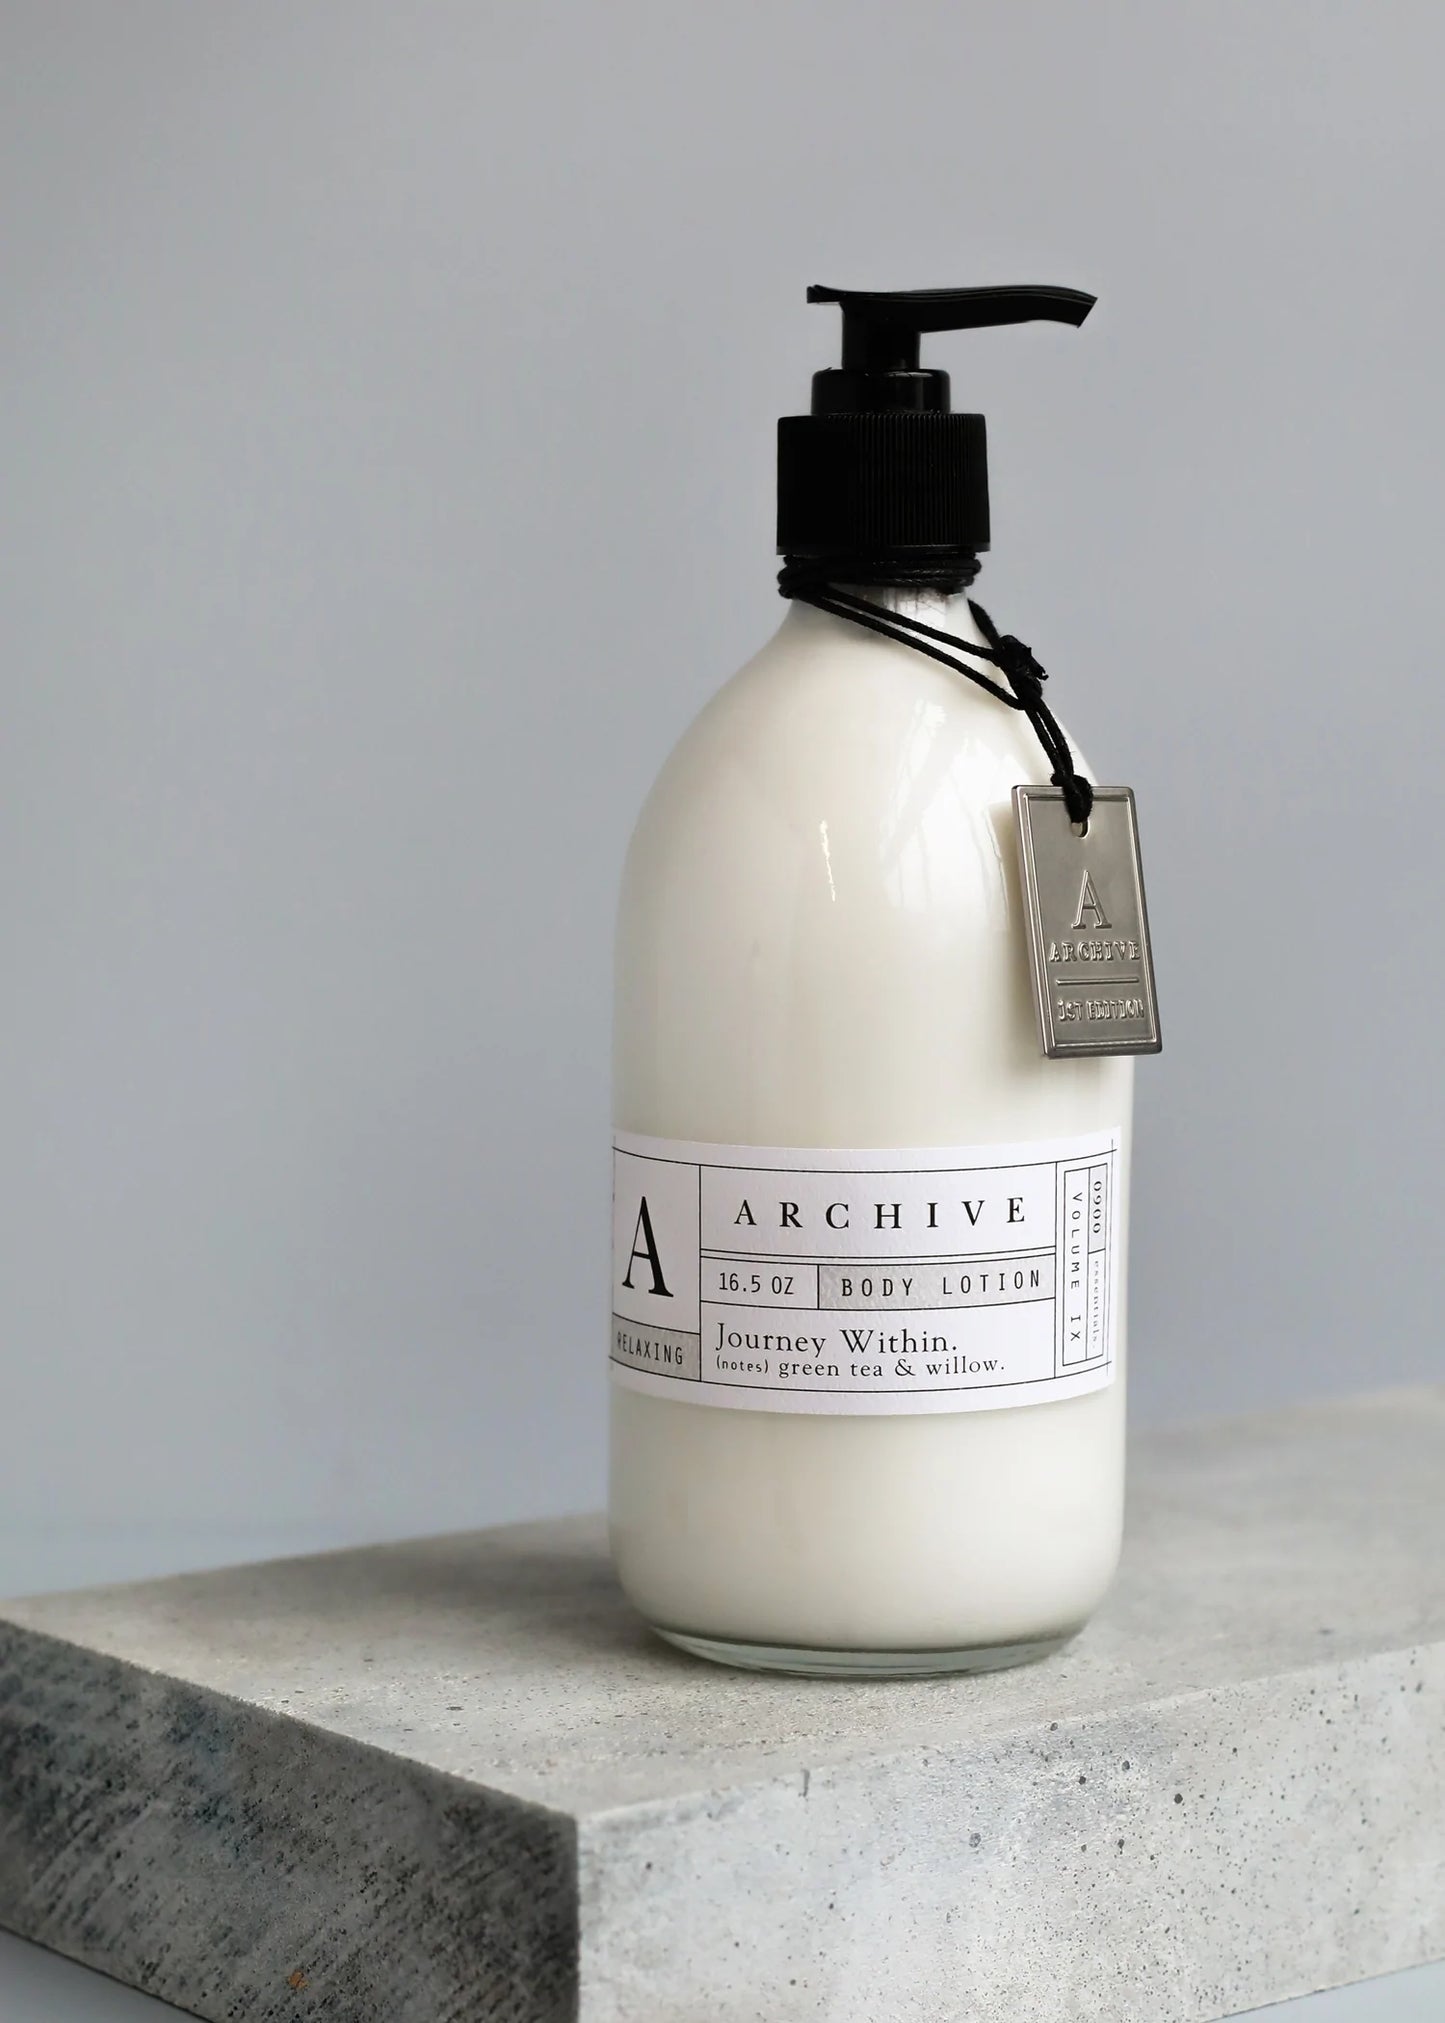 Archive Body Lotions